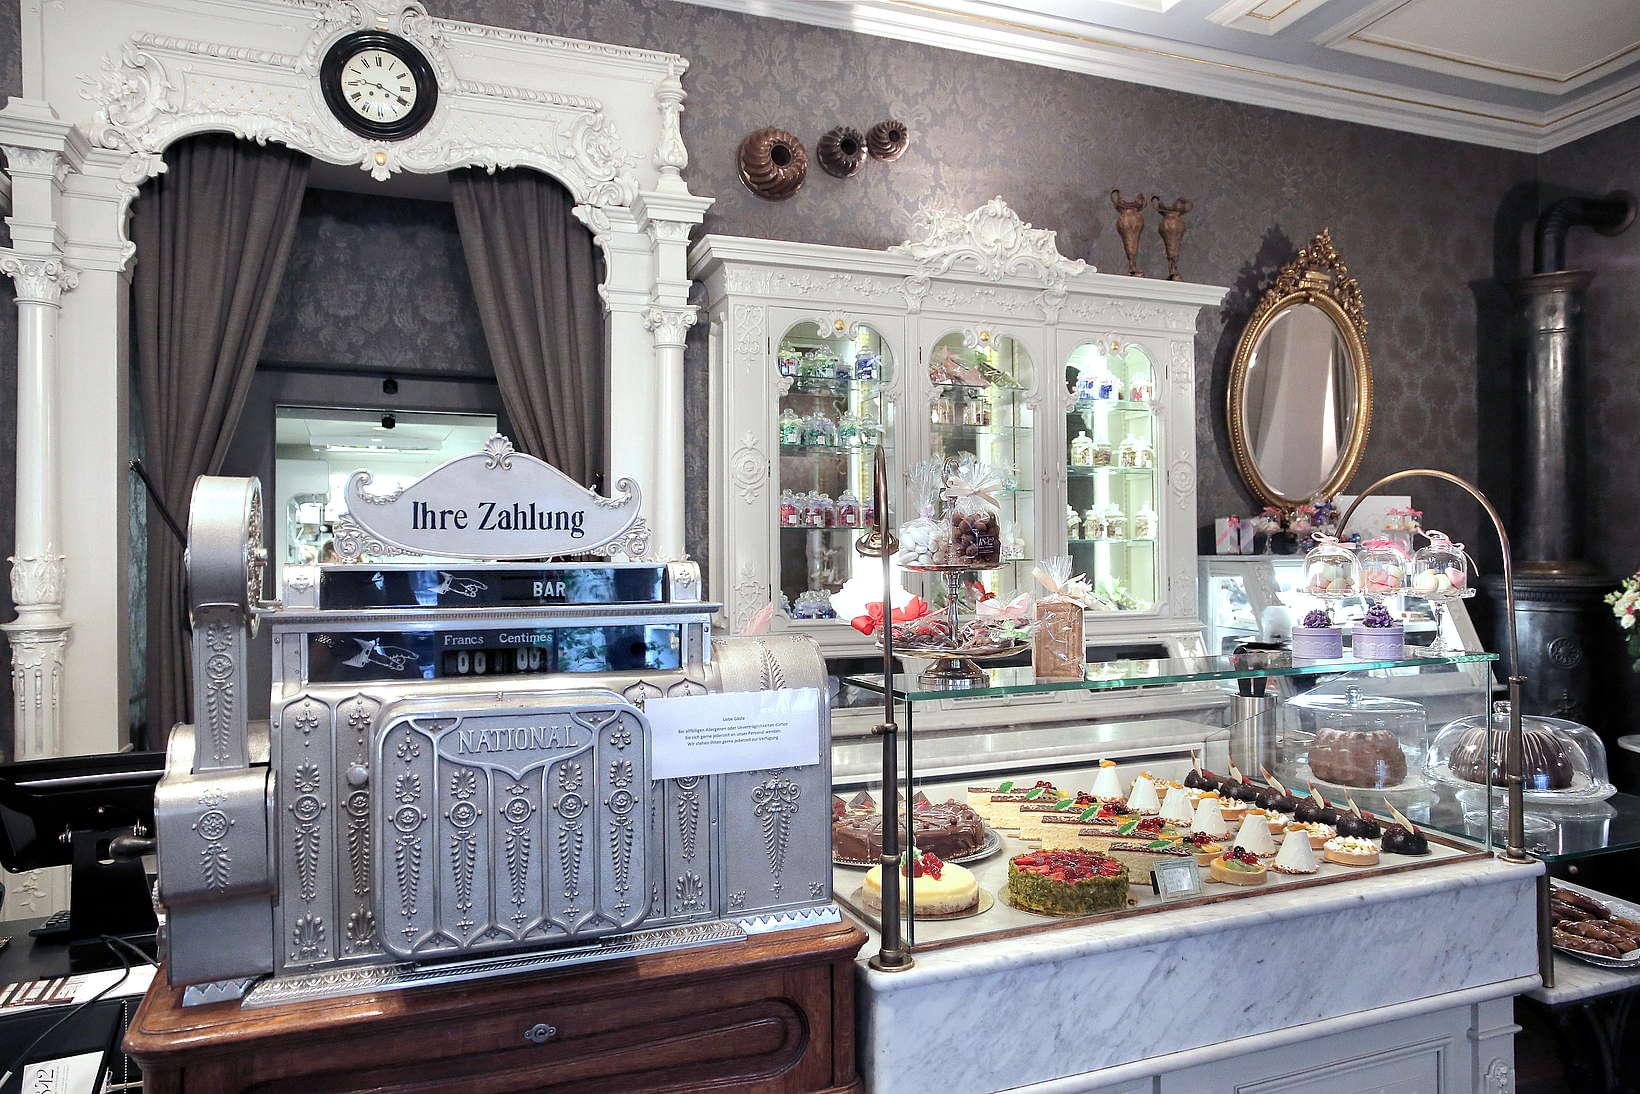 Enjoy coffee and pastry at Péclard in Conditorei Schober